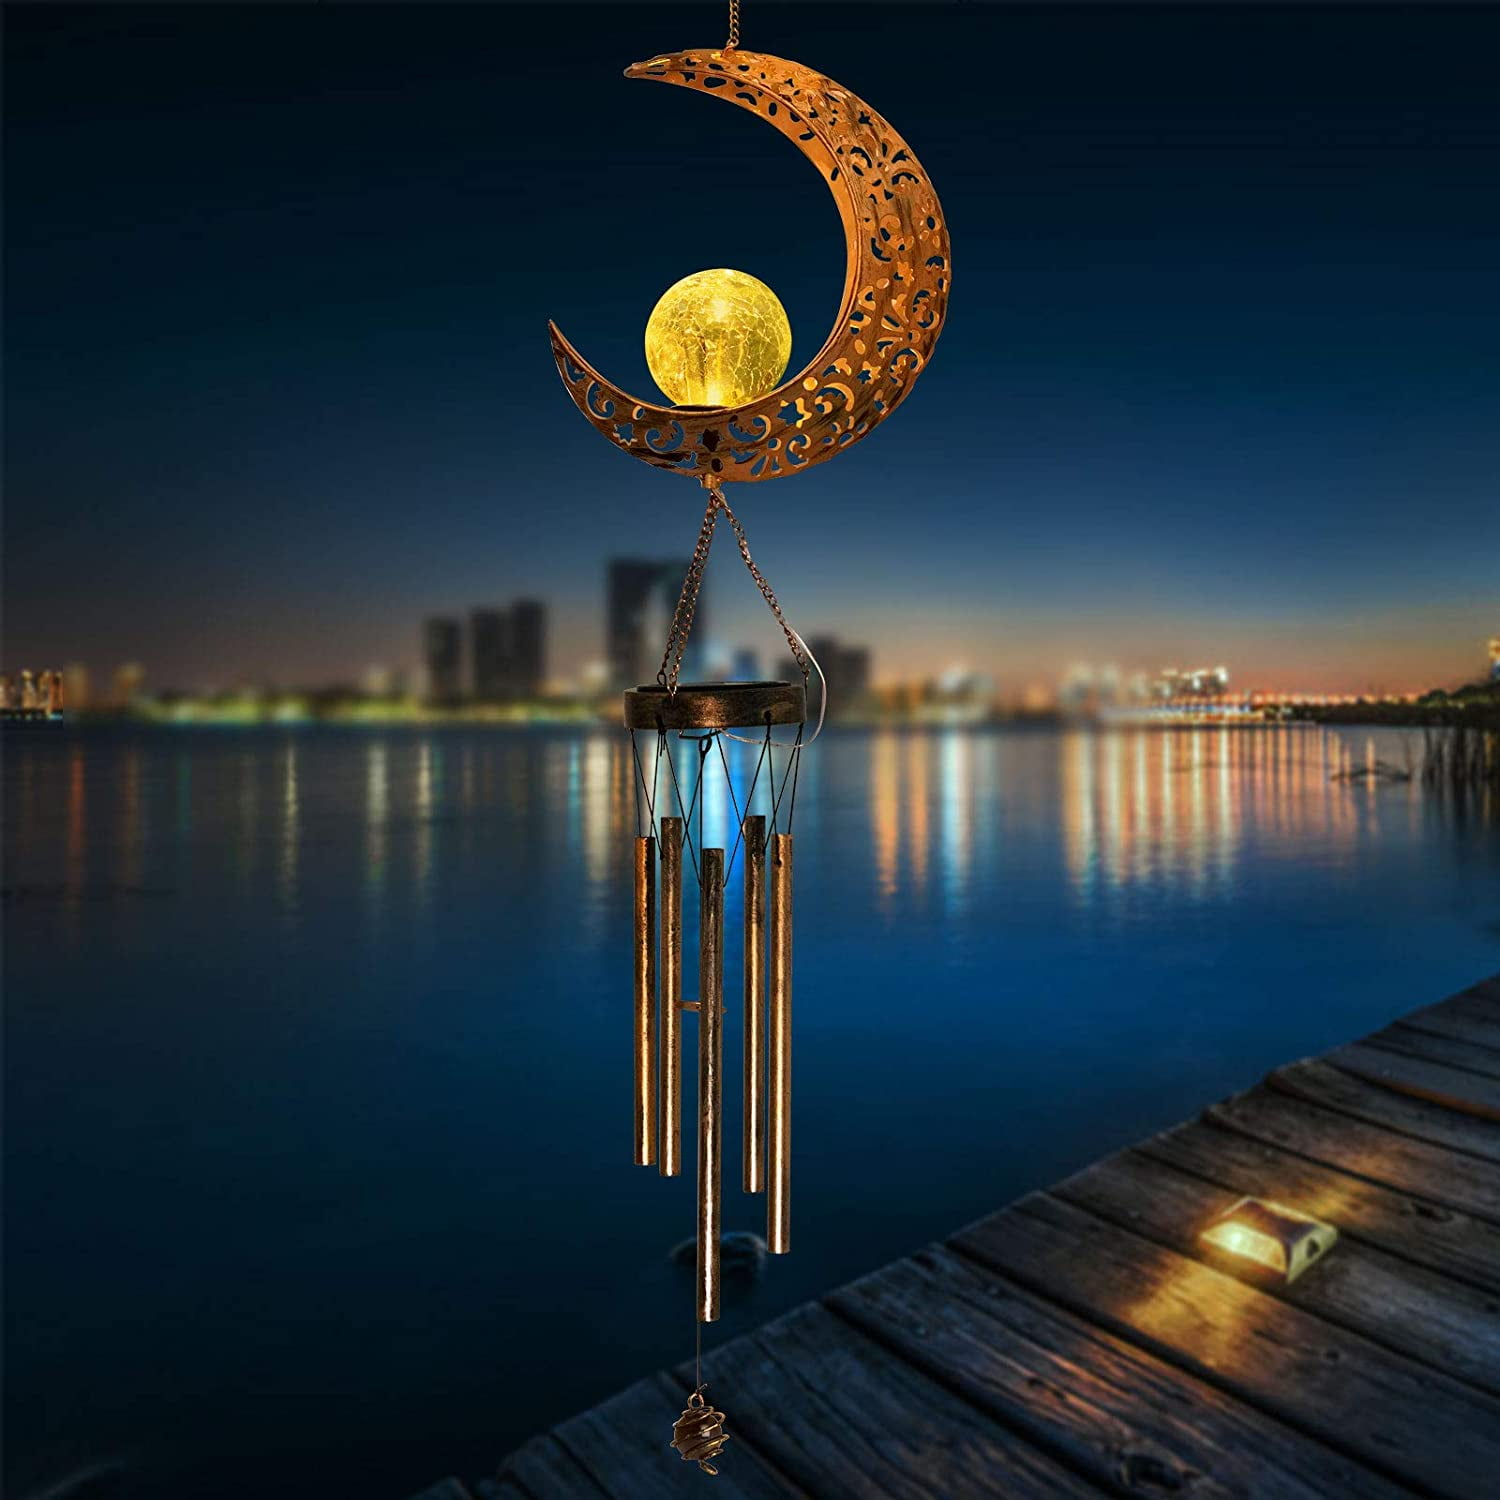 Moon Crackle Glass Ball Wind Chimes Solar Wind Chimes Moon Decor for Outside Outdoor Clearance Gardening Gifts Birthday Gifts for mom for Women Grandma giftsChristmas Decorations Christmas Light